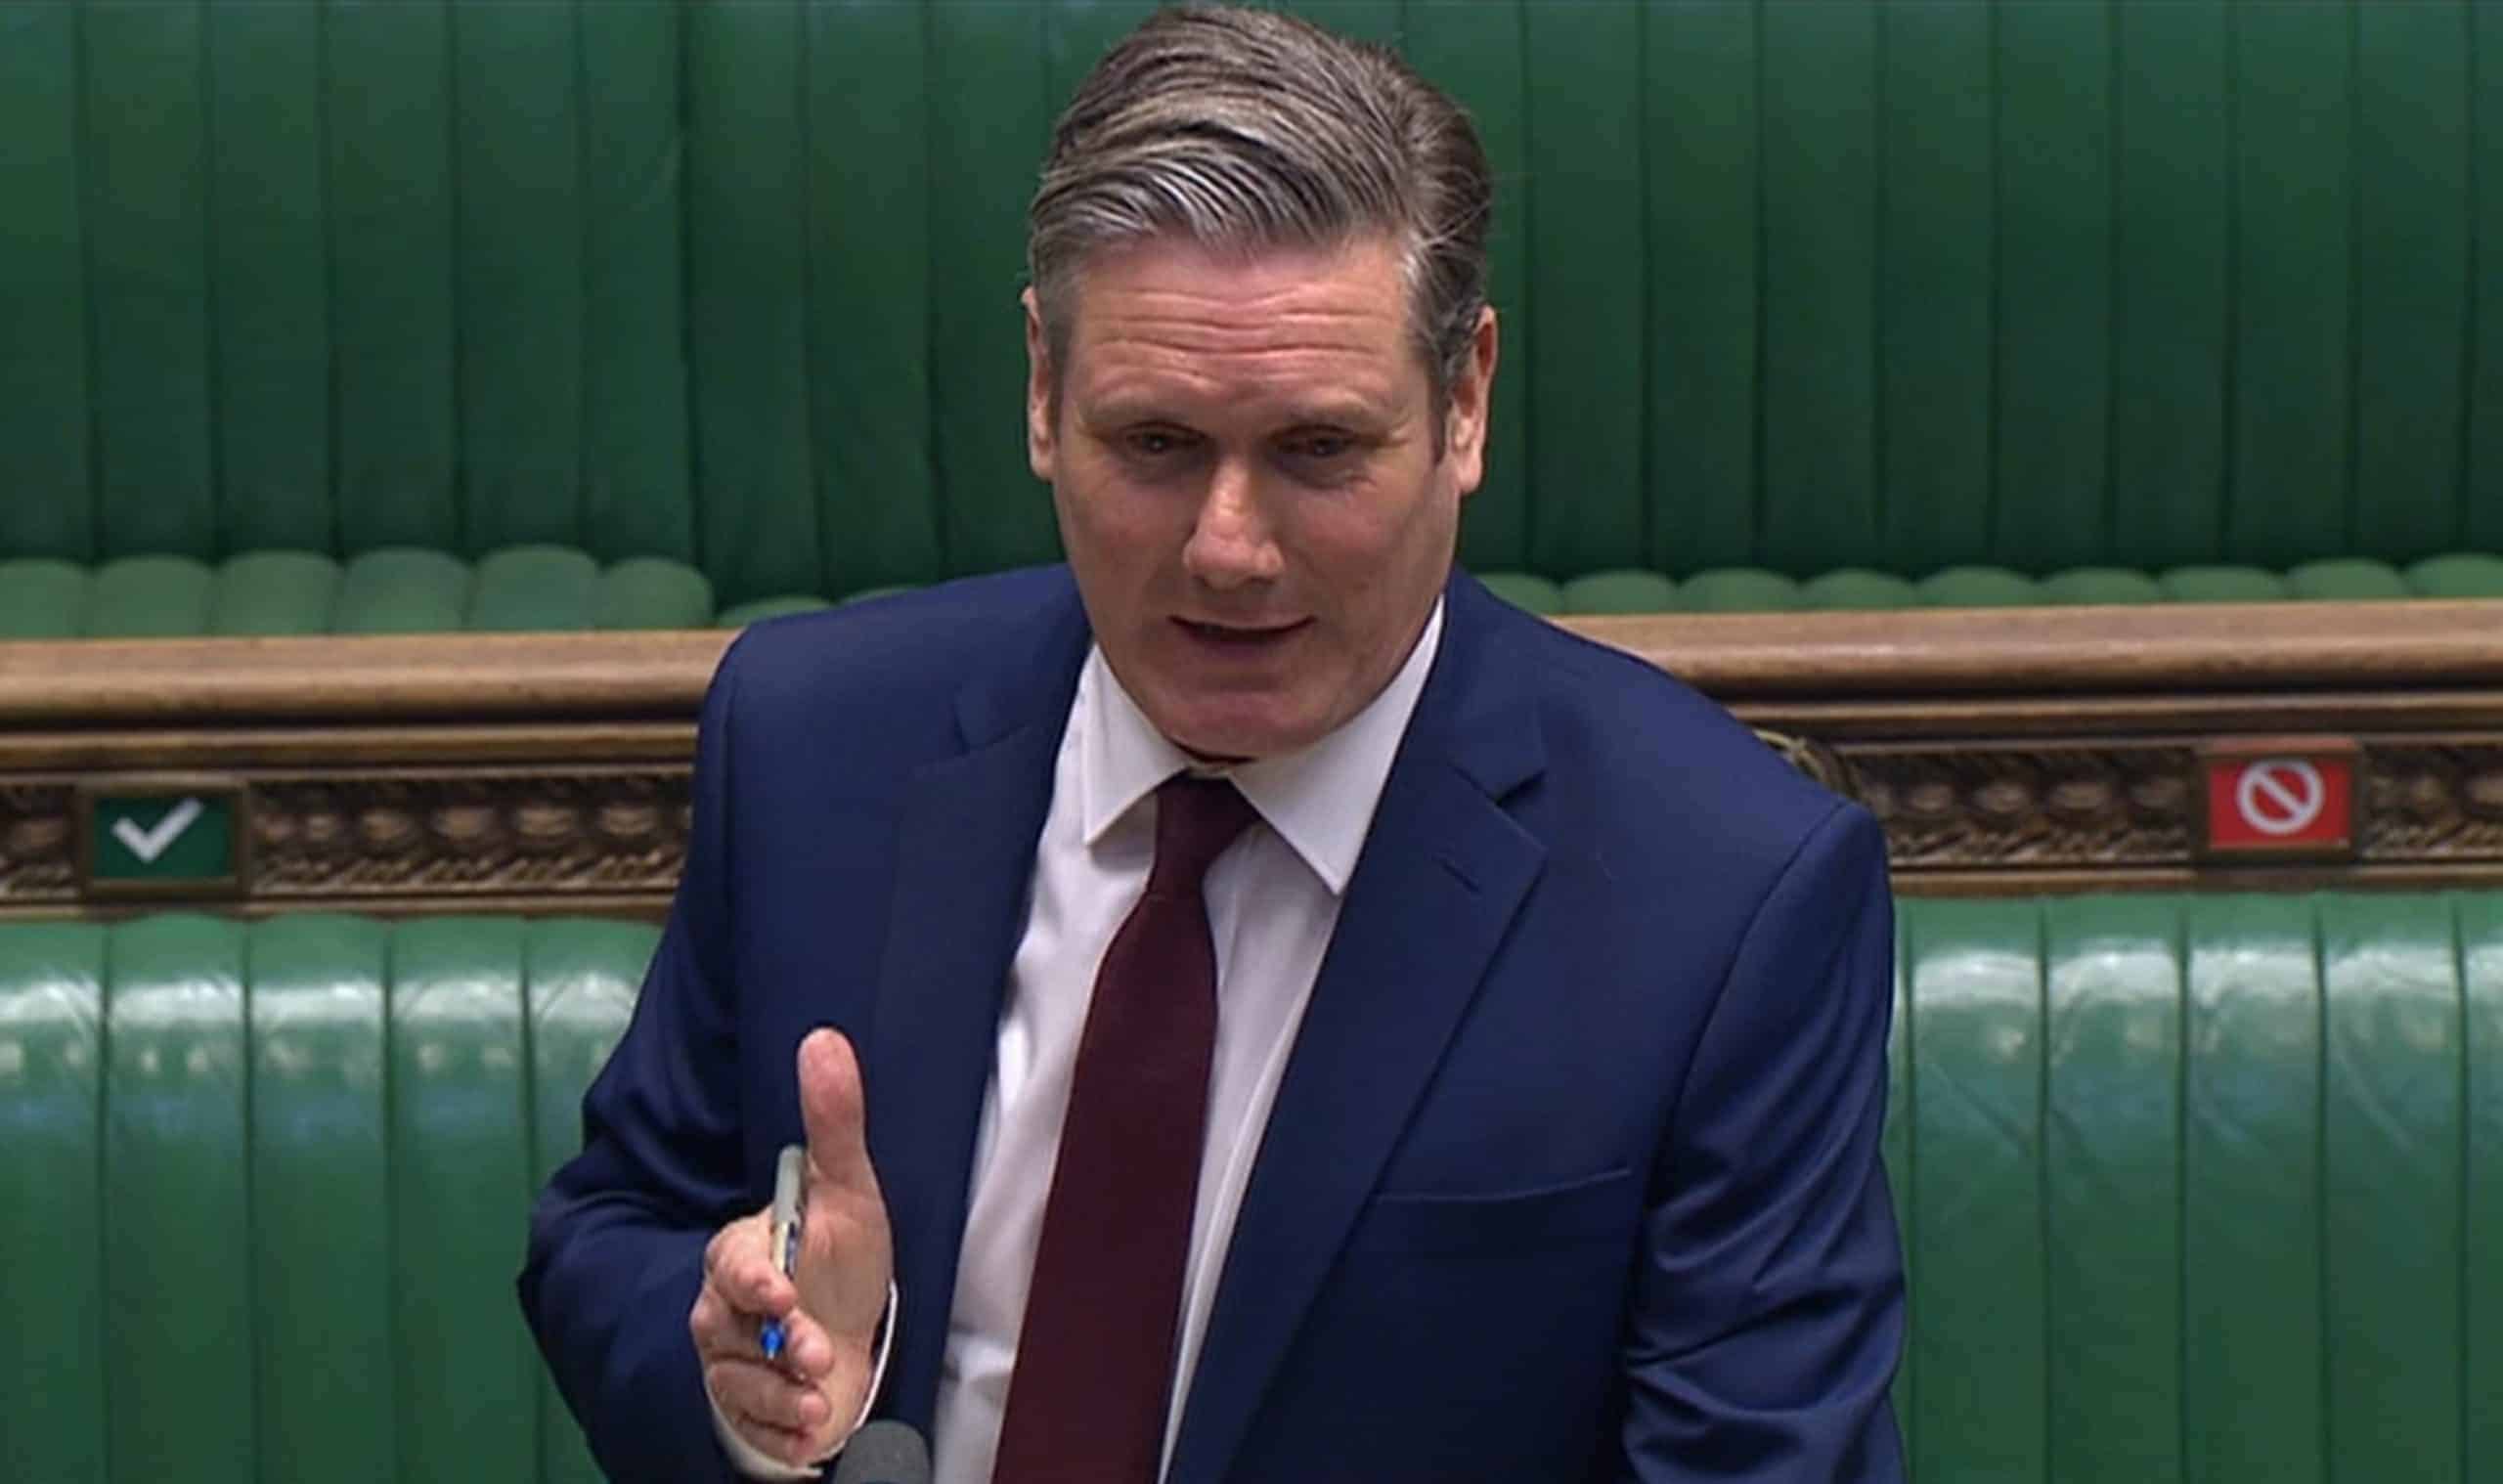 Starmer: “There is a pattern emerging” with government’s response